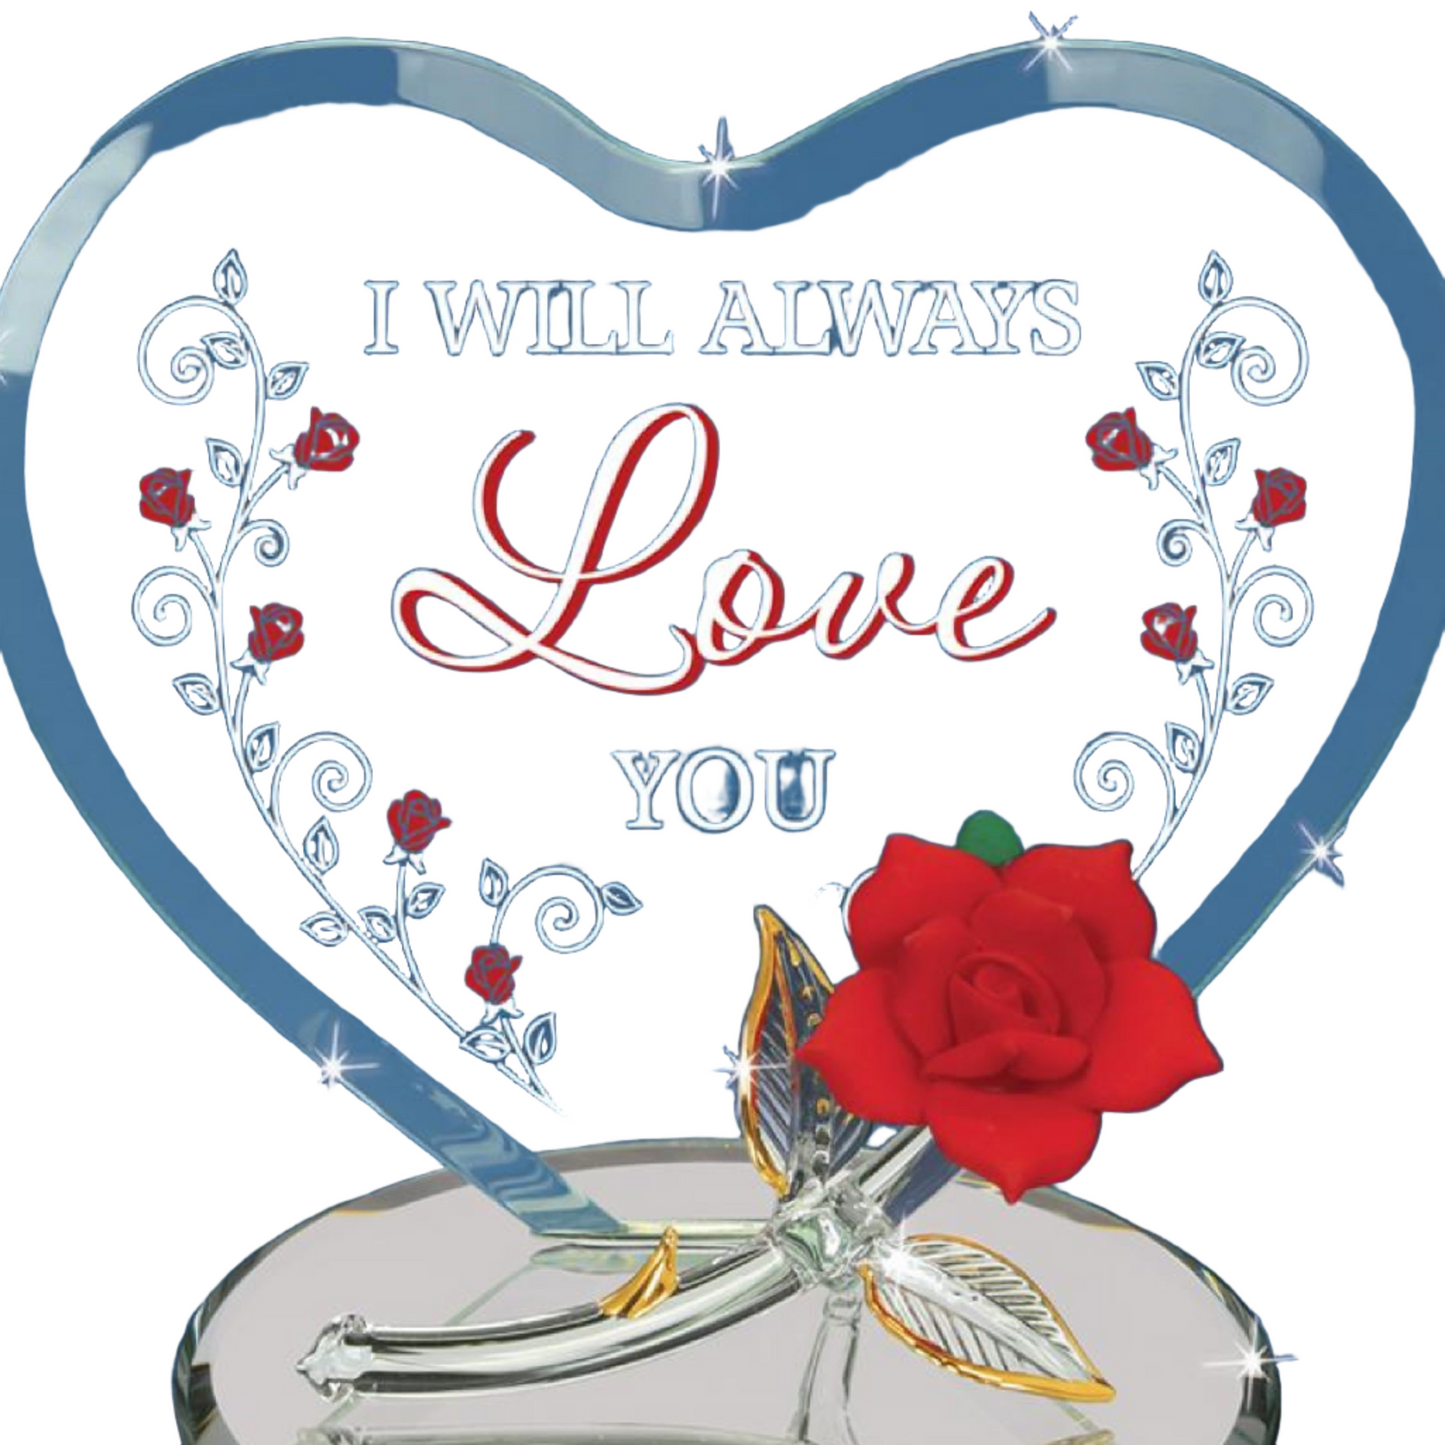 Glass Baron "I Will Always Love You" Red Plaque